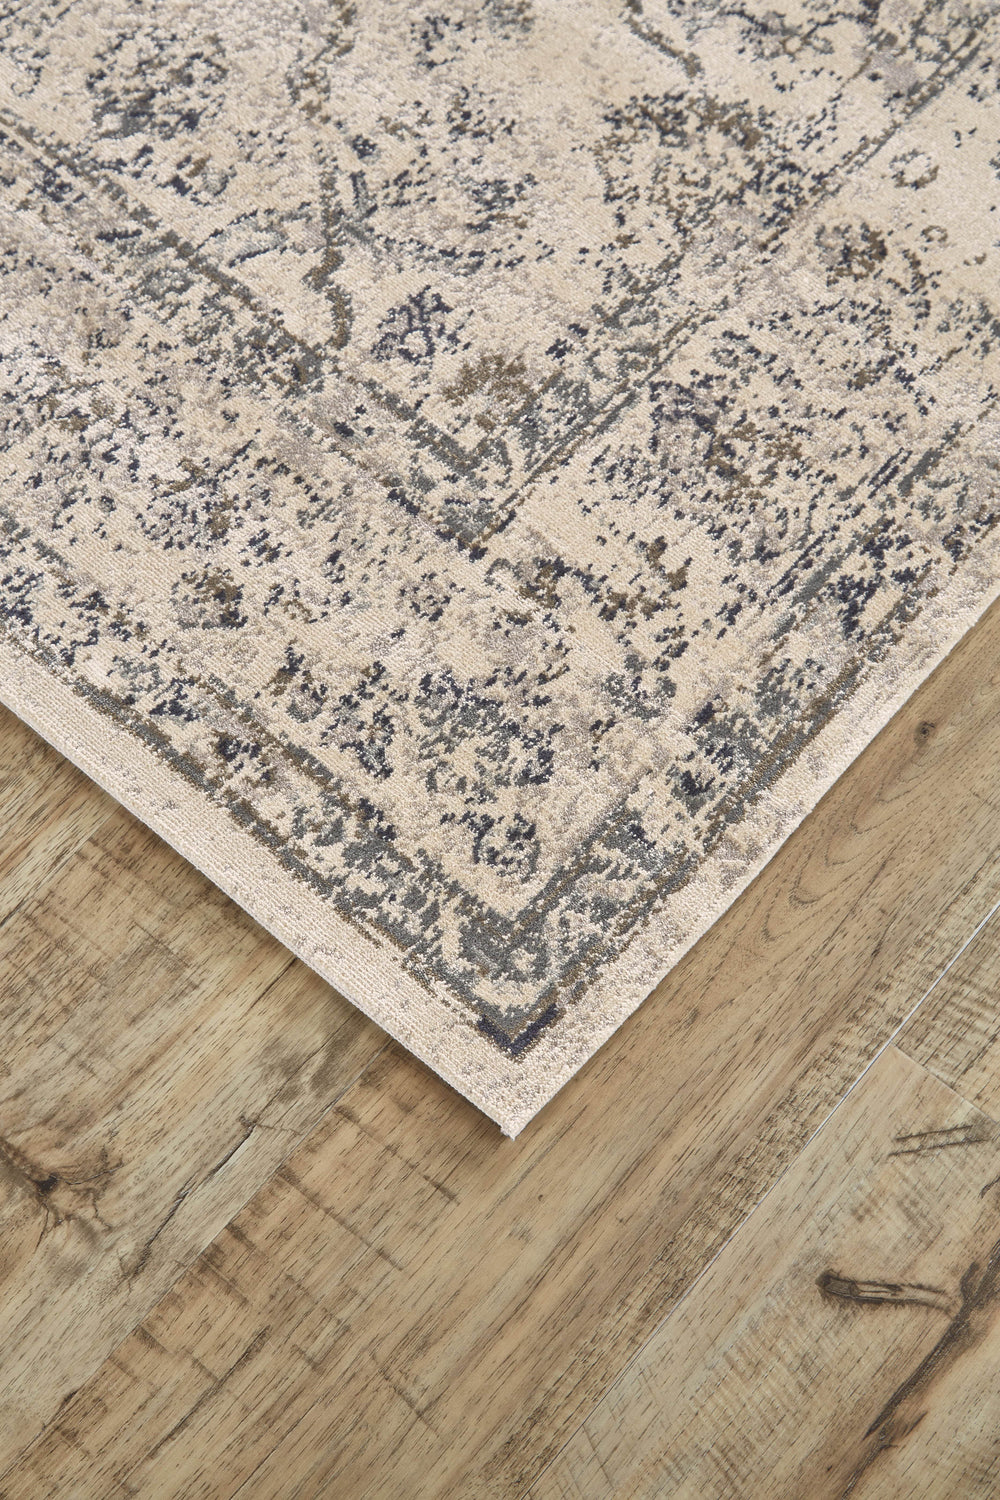 Feizy Feizy Fiona Modern Ornamental Rug - Available in 5 Sizes - Cream & Gray